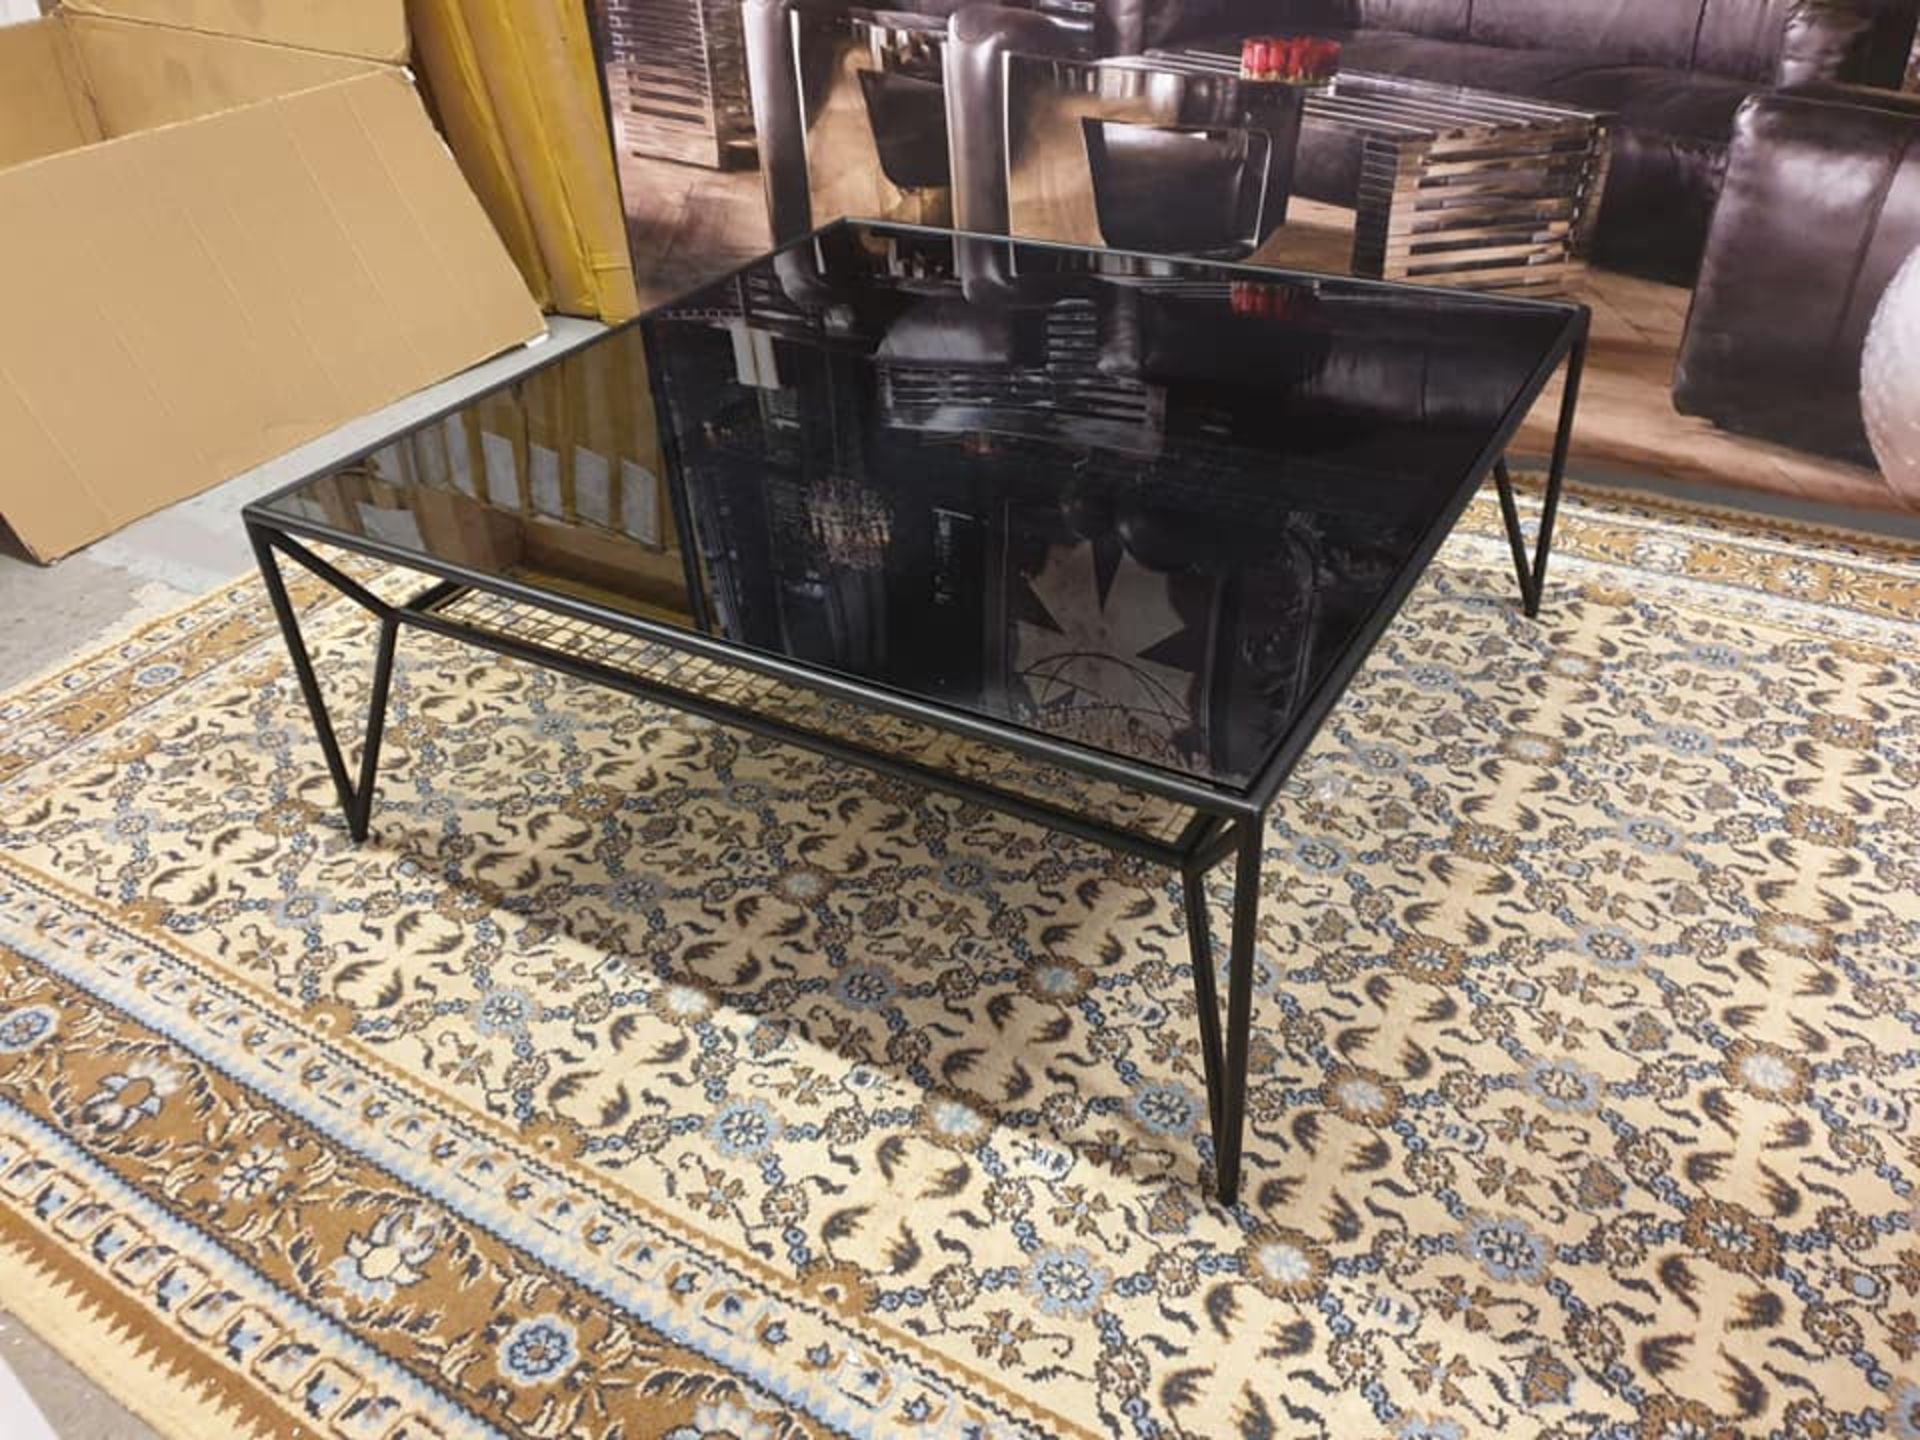 Ashkelly Coffee Table Black Metal Frame With Black Glass Top Brass Inlay With Low Shelf The Contrast